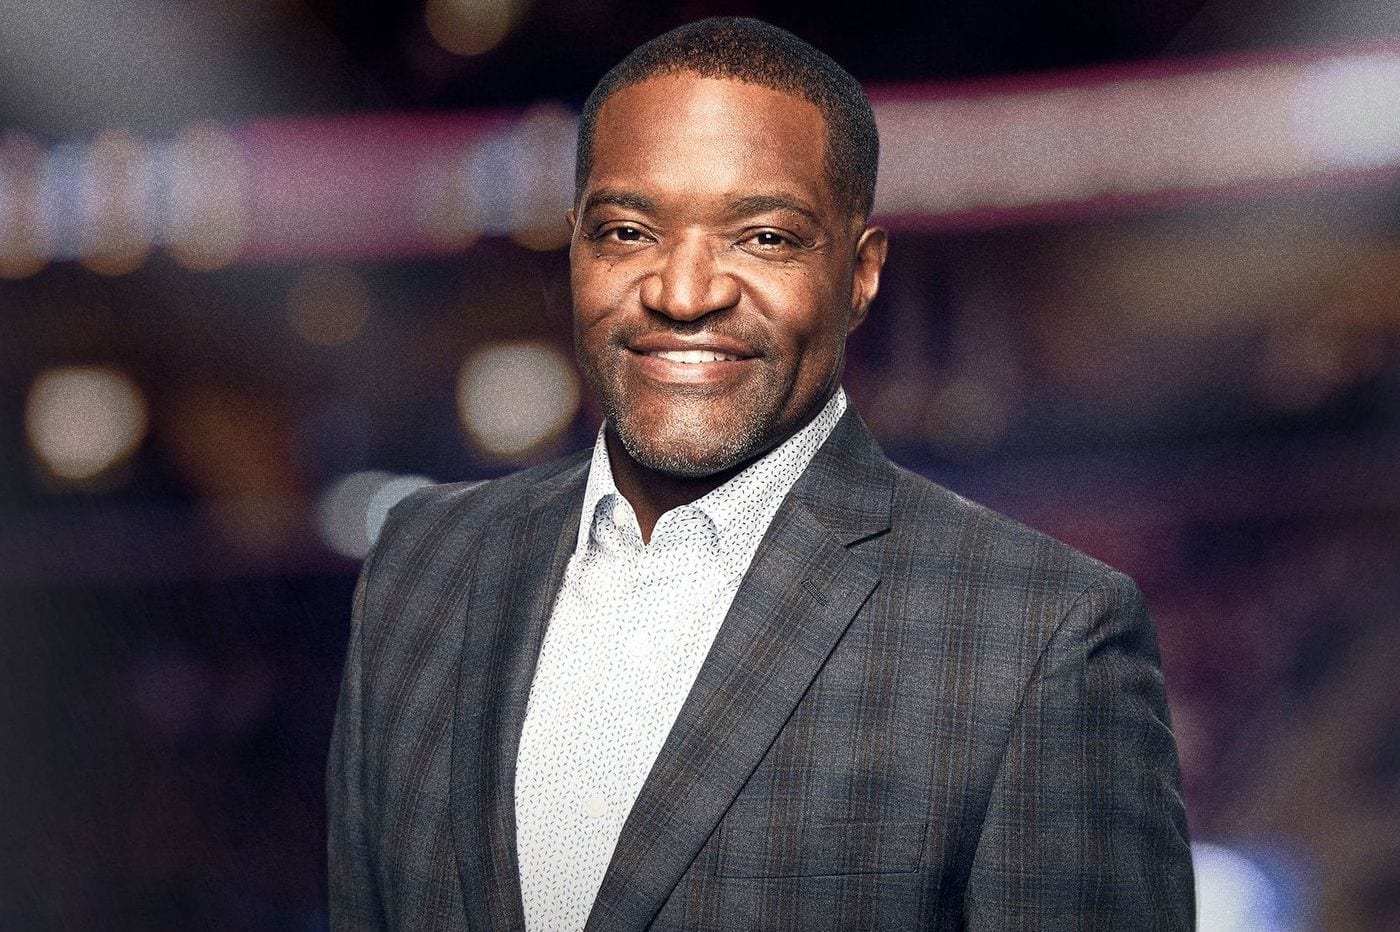 NBA Analyst and Reporter Sekou Smith Dies at 48 From COVID-19